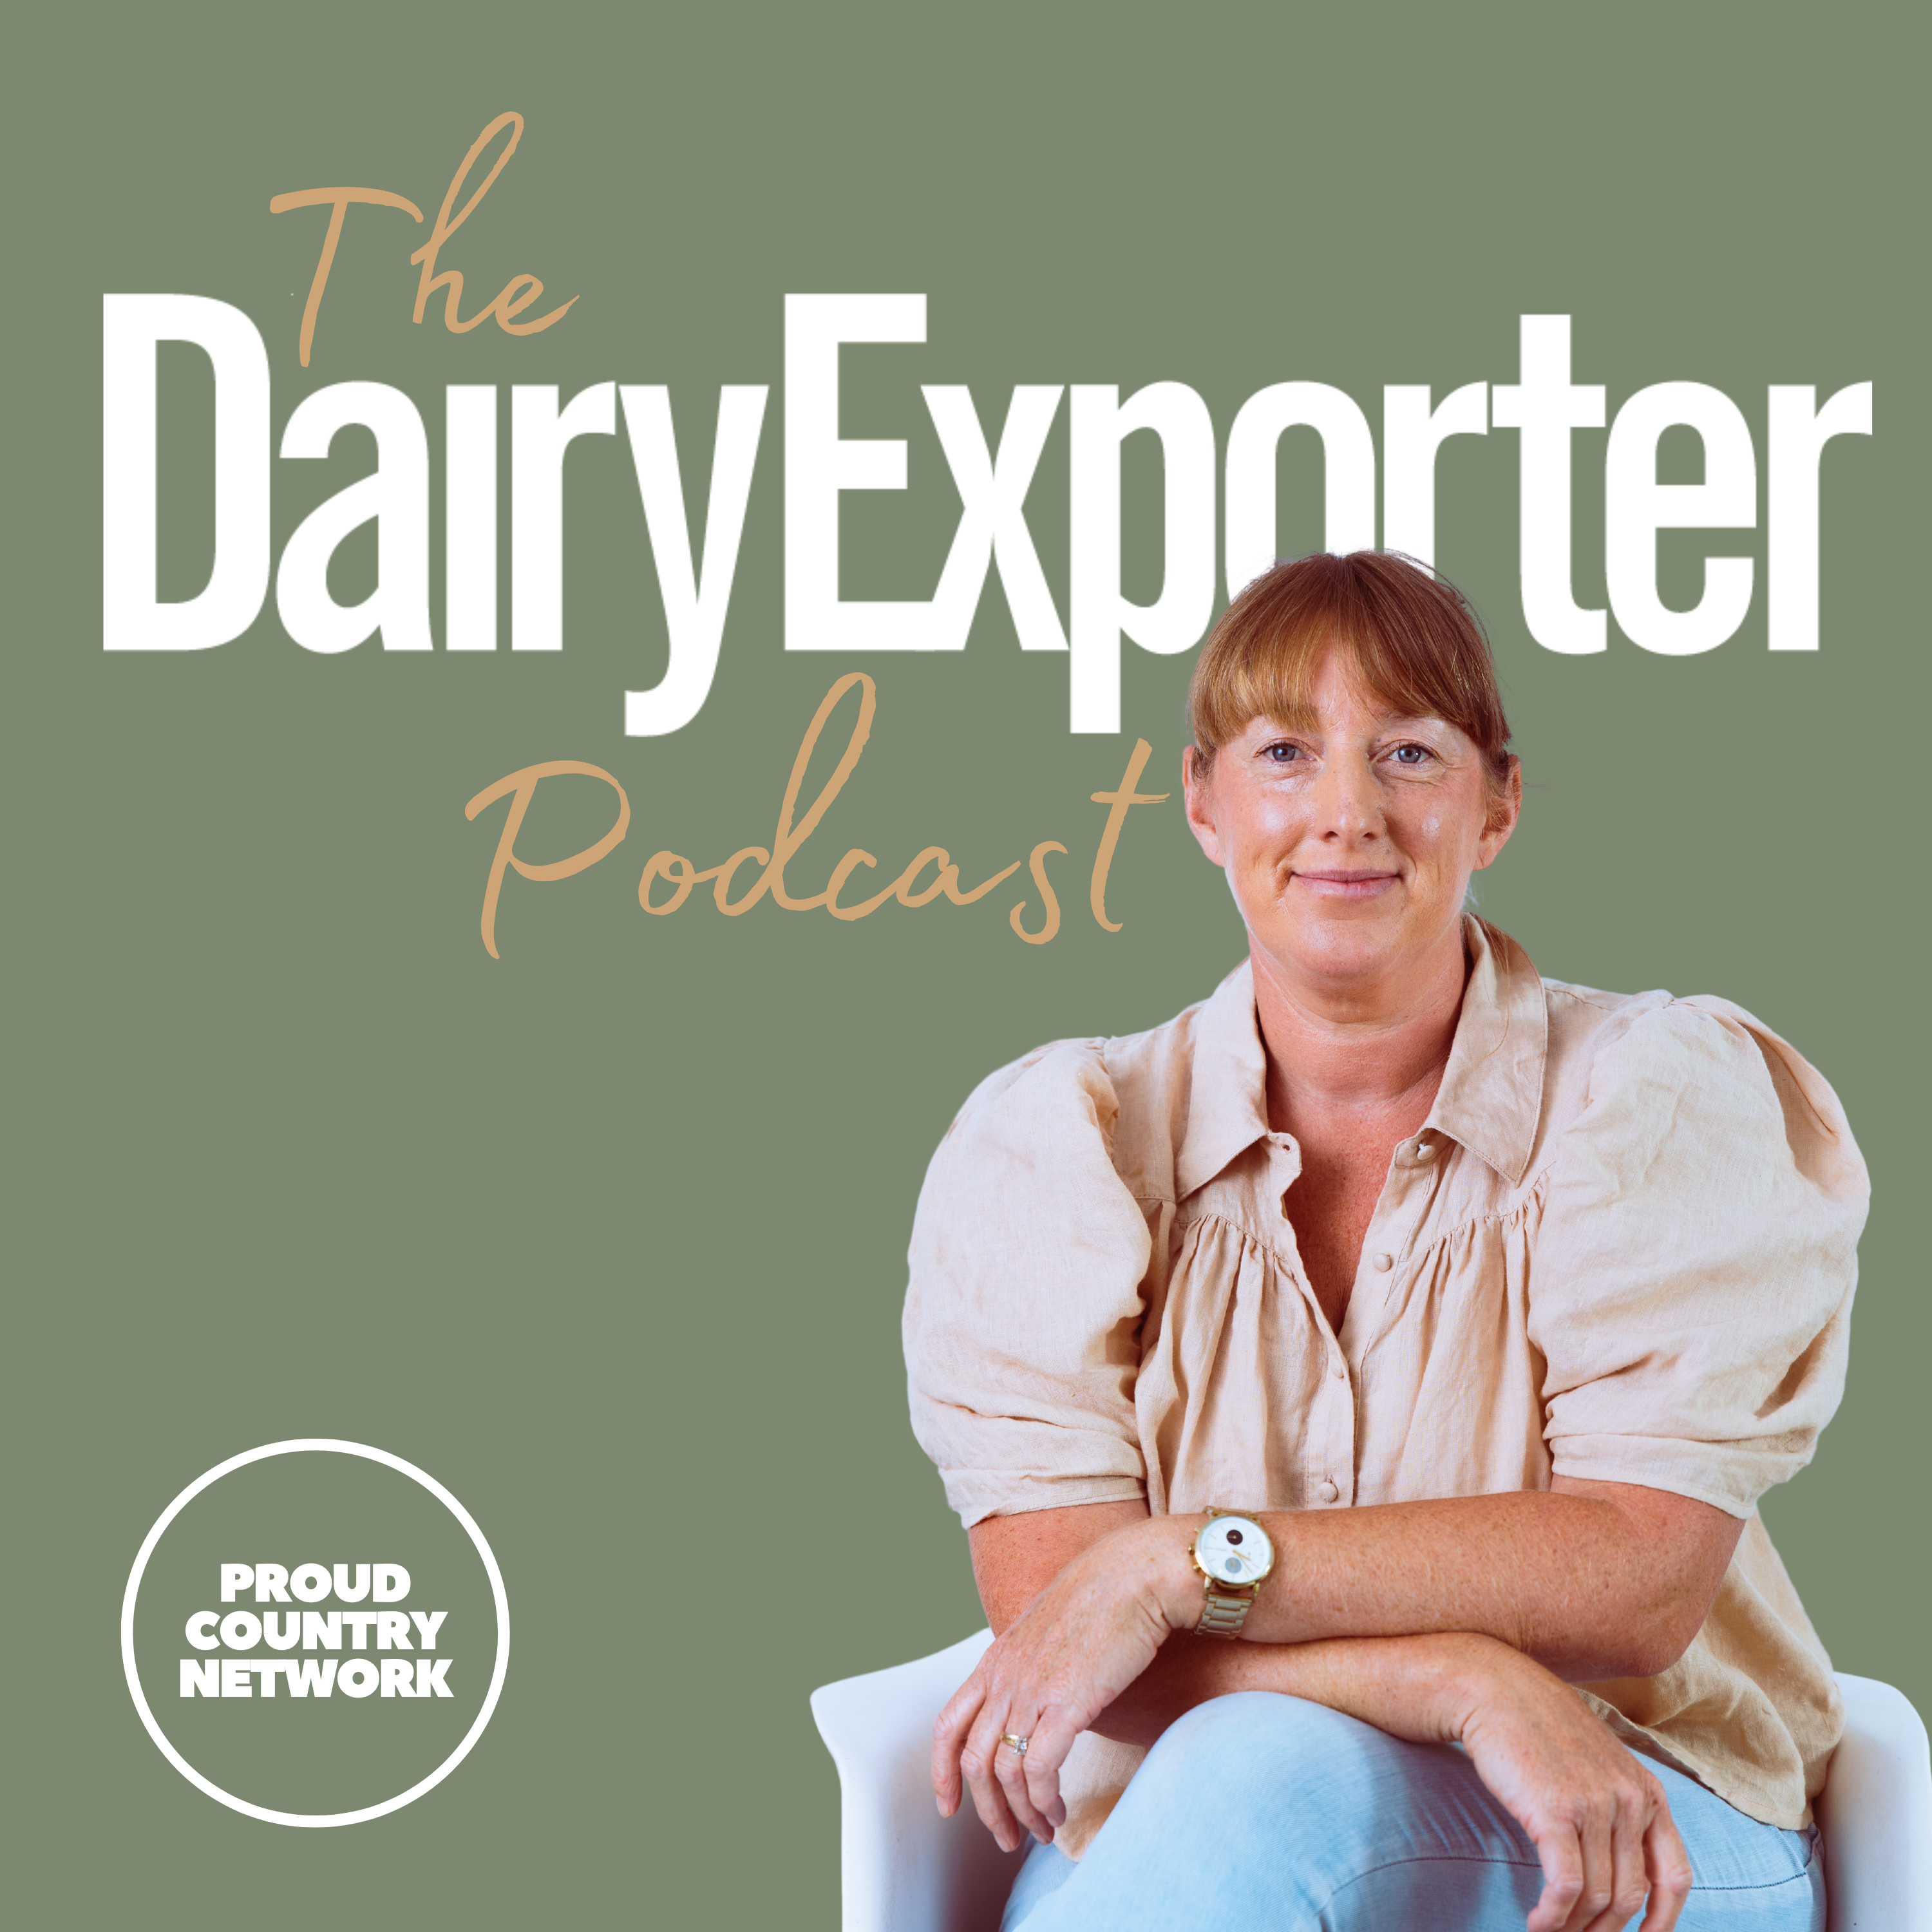 The Dairy Exporter Podcast